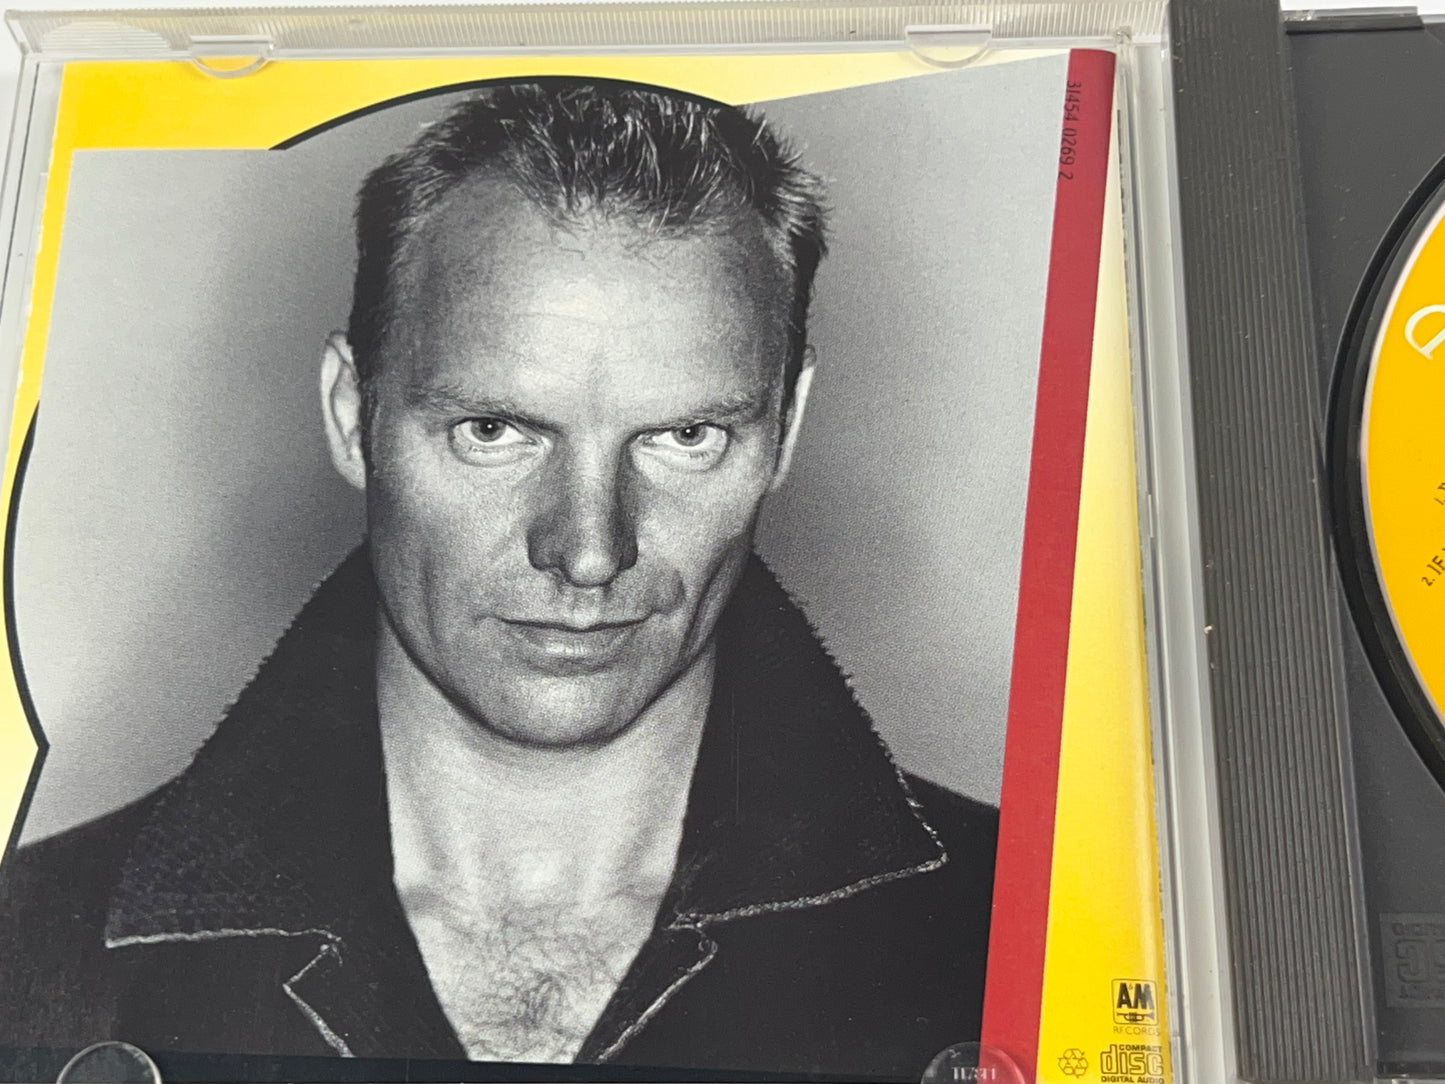 Fields of Gold: The Best of Sting 1984-1994 - Audio CD By Sting